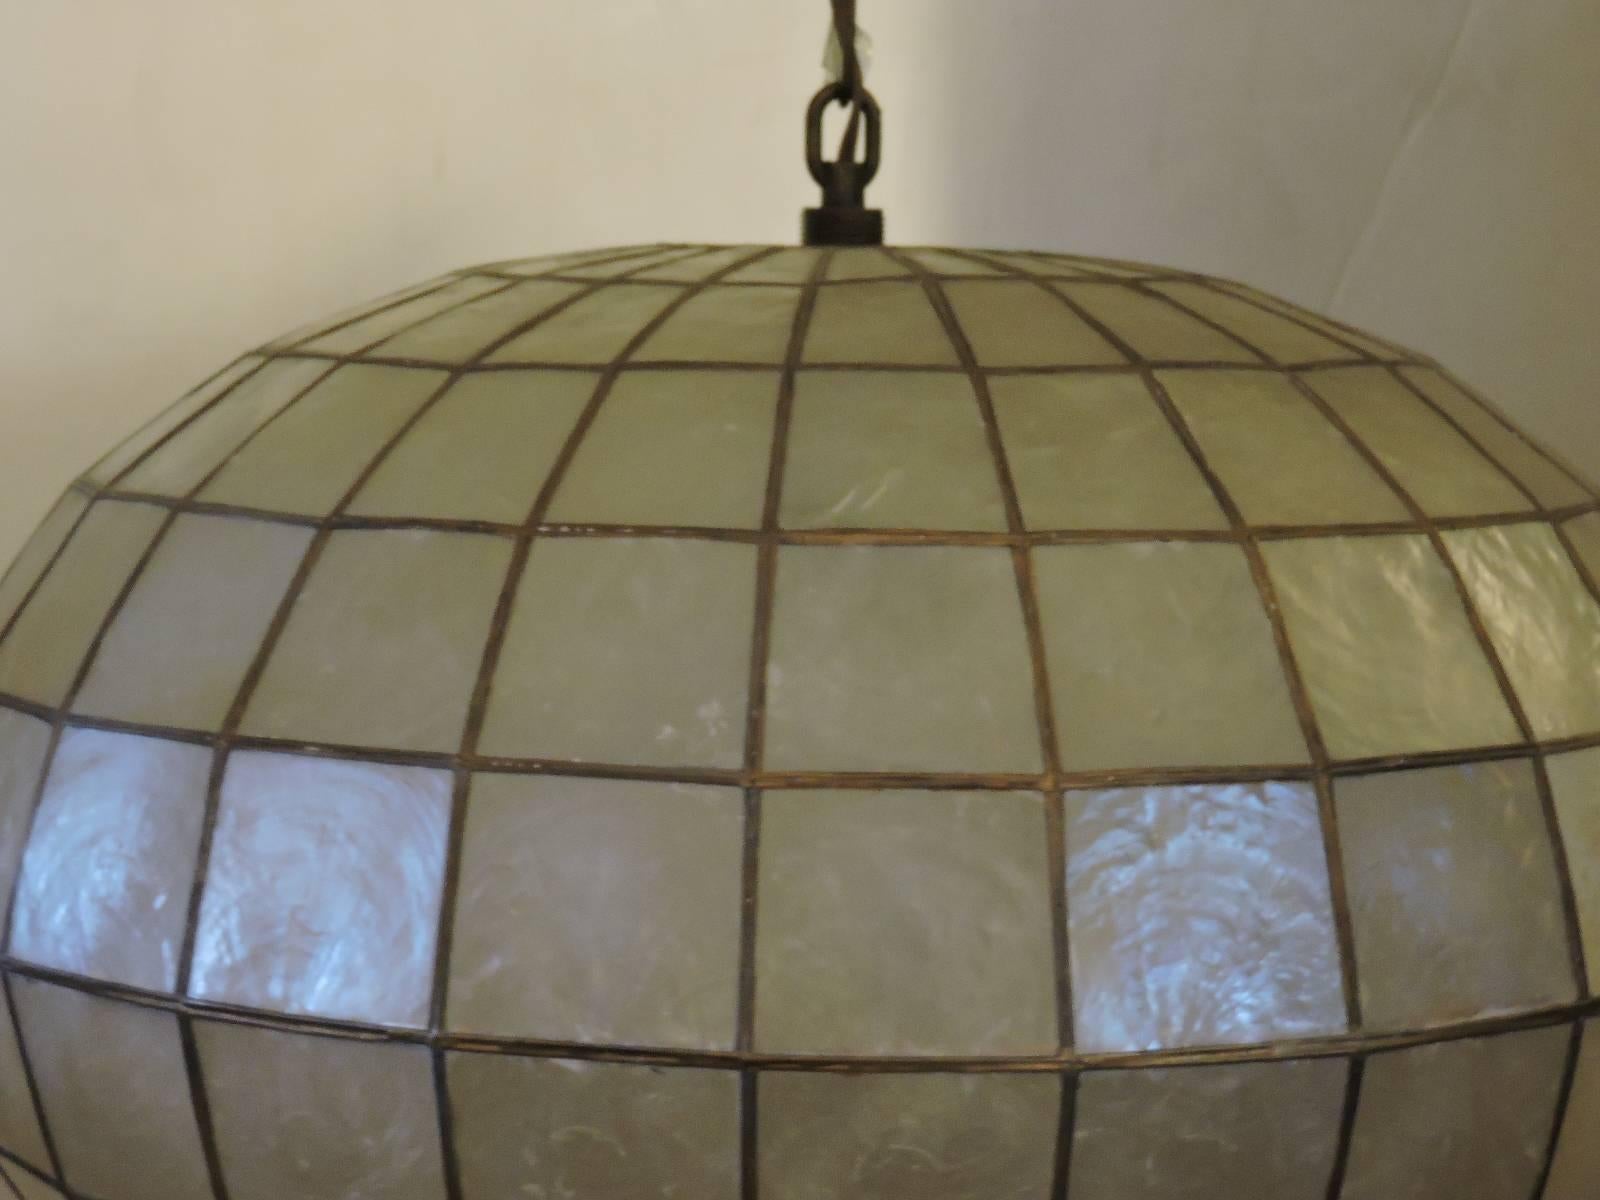 A large Minimalist architectural spherical form faceted Capiz shell hanging pendant chandelier light with two interior bulb sockets. Overall in great vintage working condition. Very good quality possibly by Feldman lighting company, circa 1960. See